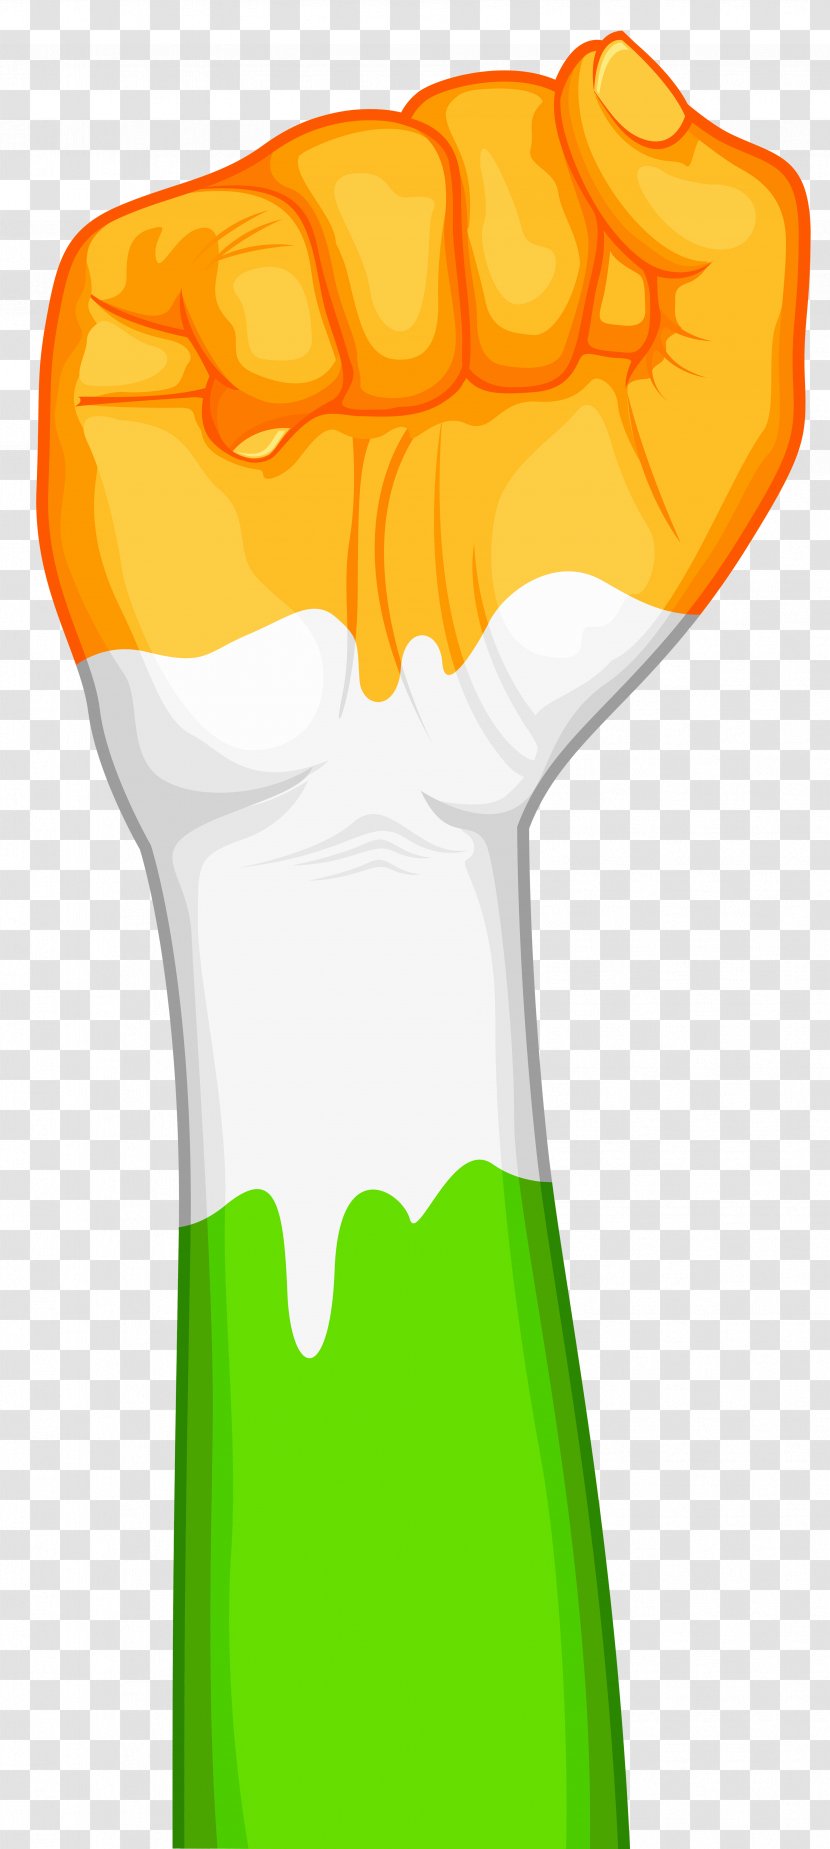 Indian Independence Day Republic January 26 Wallpaper - Flag Of India - Fist Transparent Image Transparent PNG